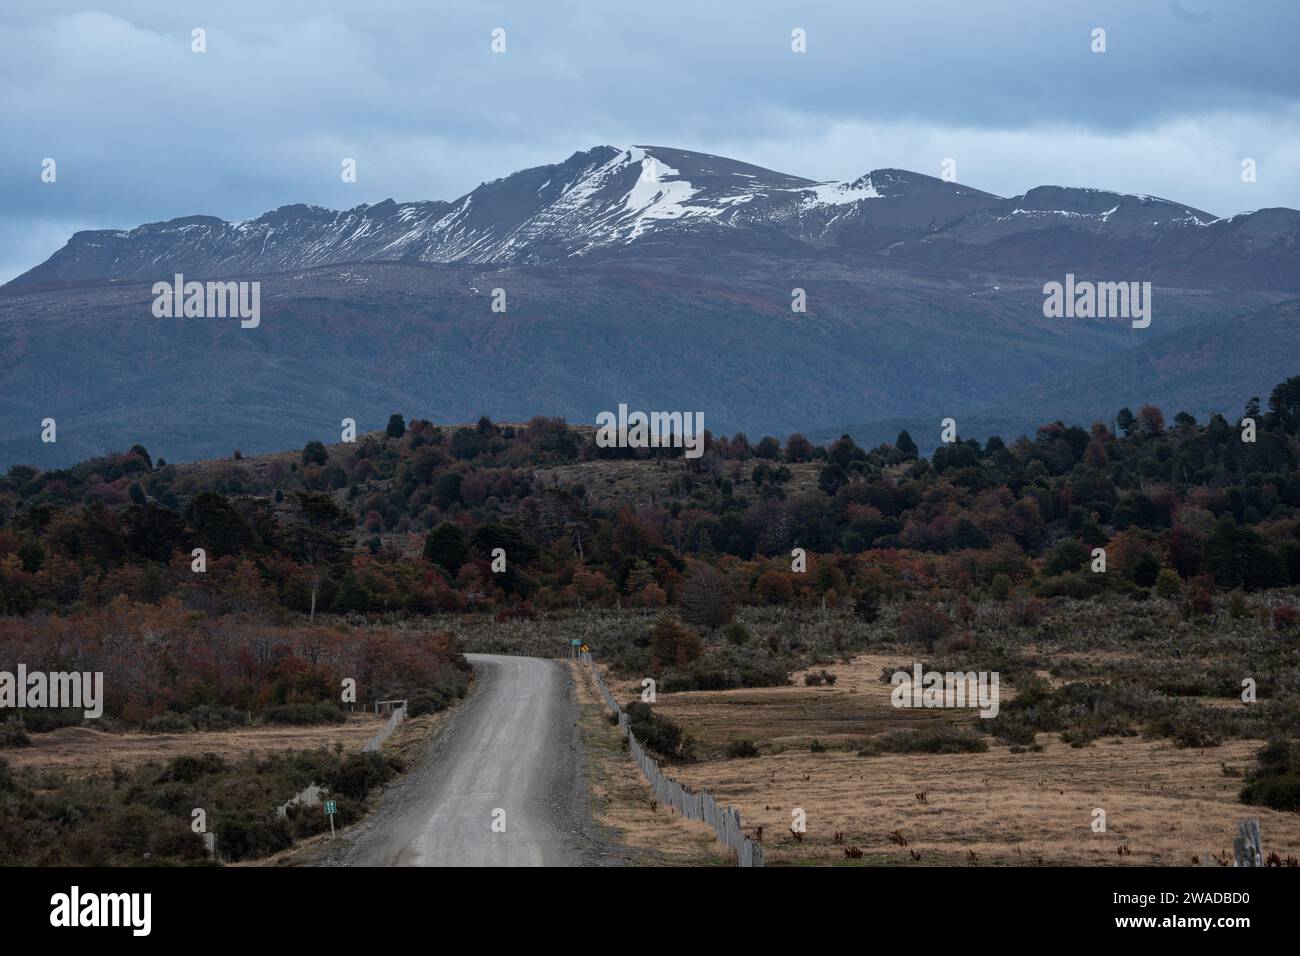 dirt road in the countryside leading to a snowy mountain Stock Photo